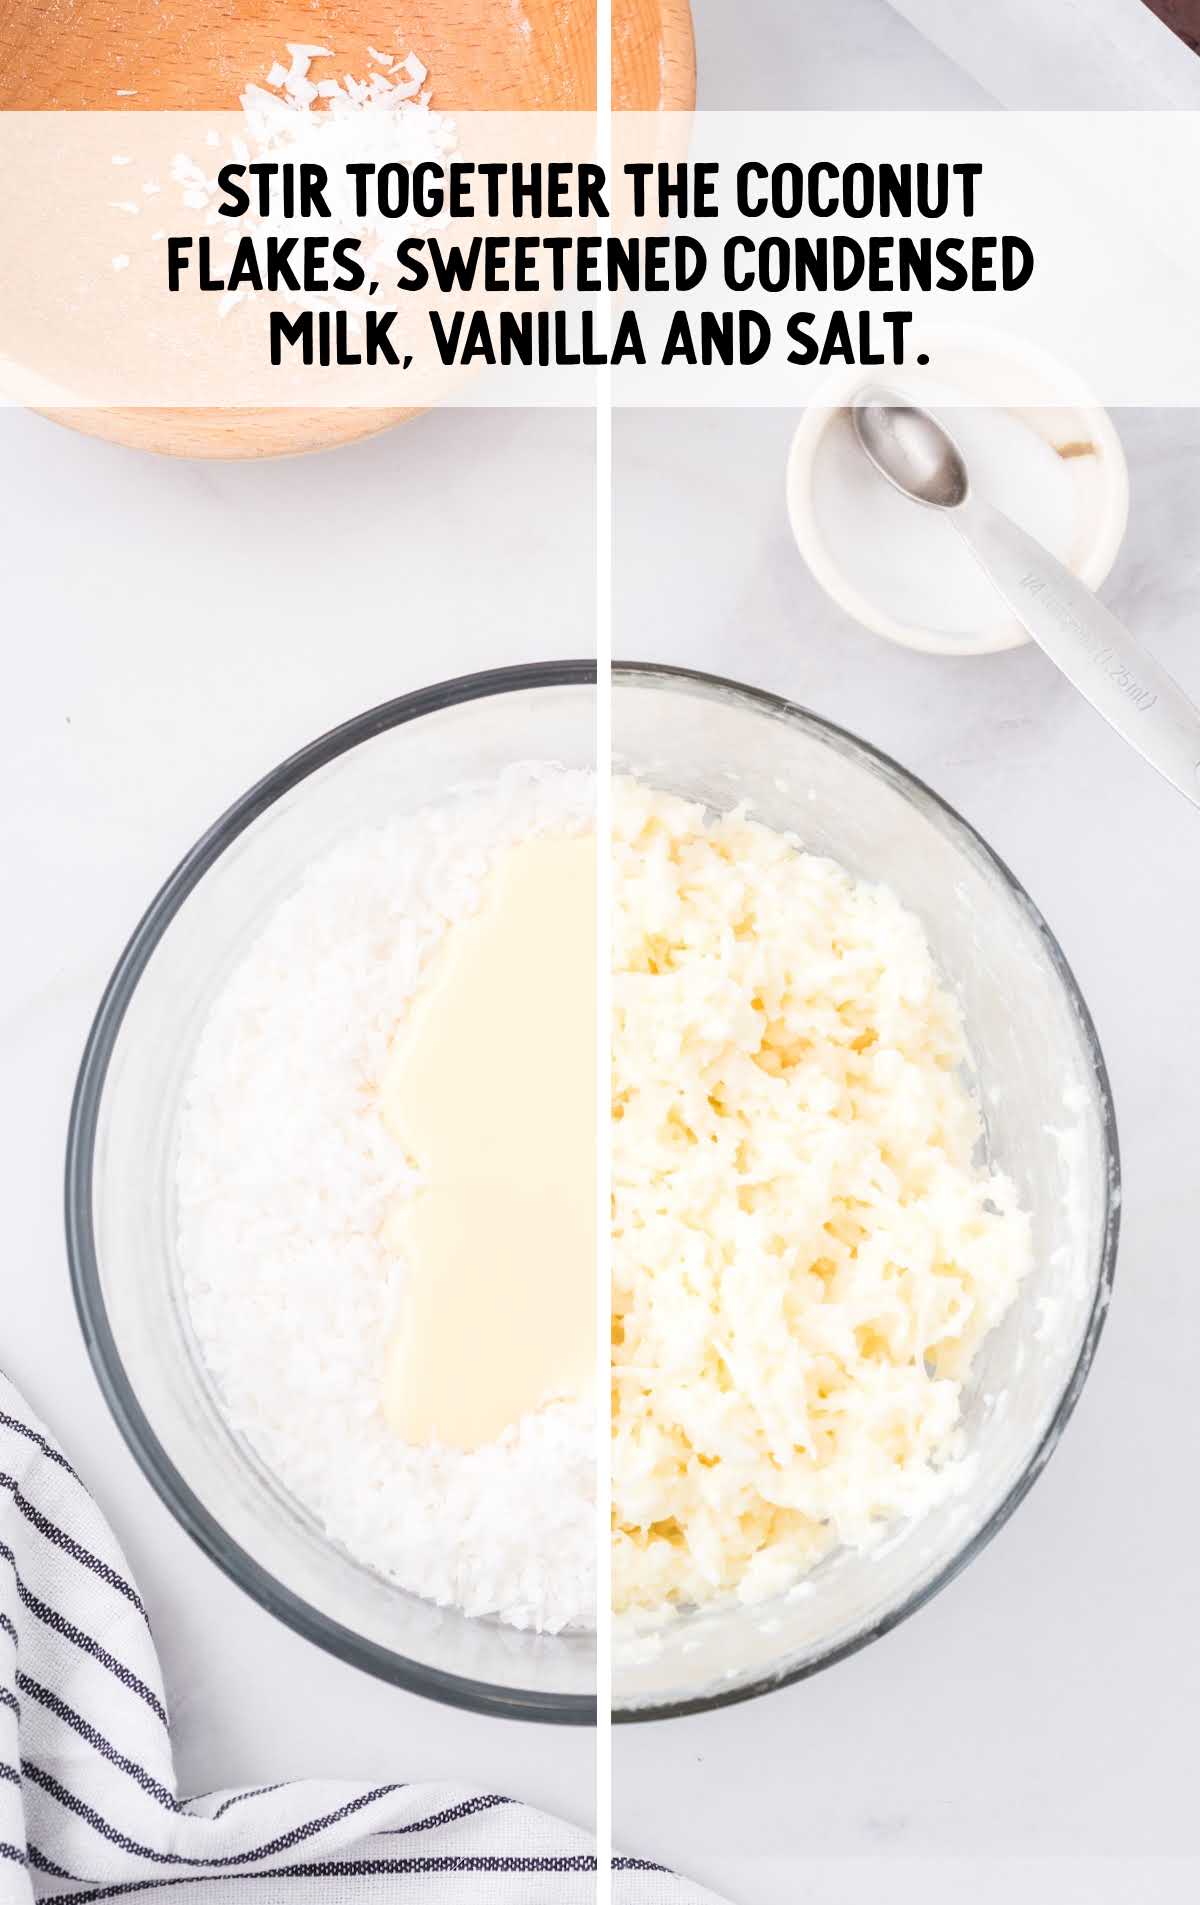 coconut flakes, sweetened condensed milk, vanilla, and salt blended together in a bowl